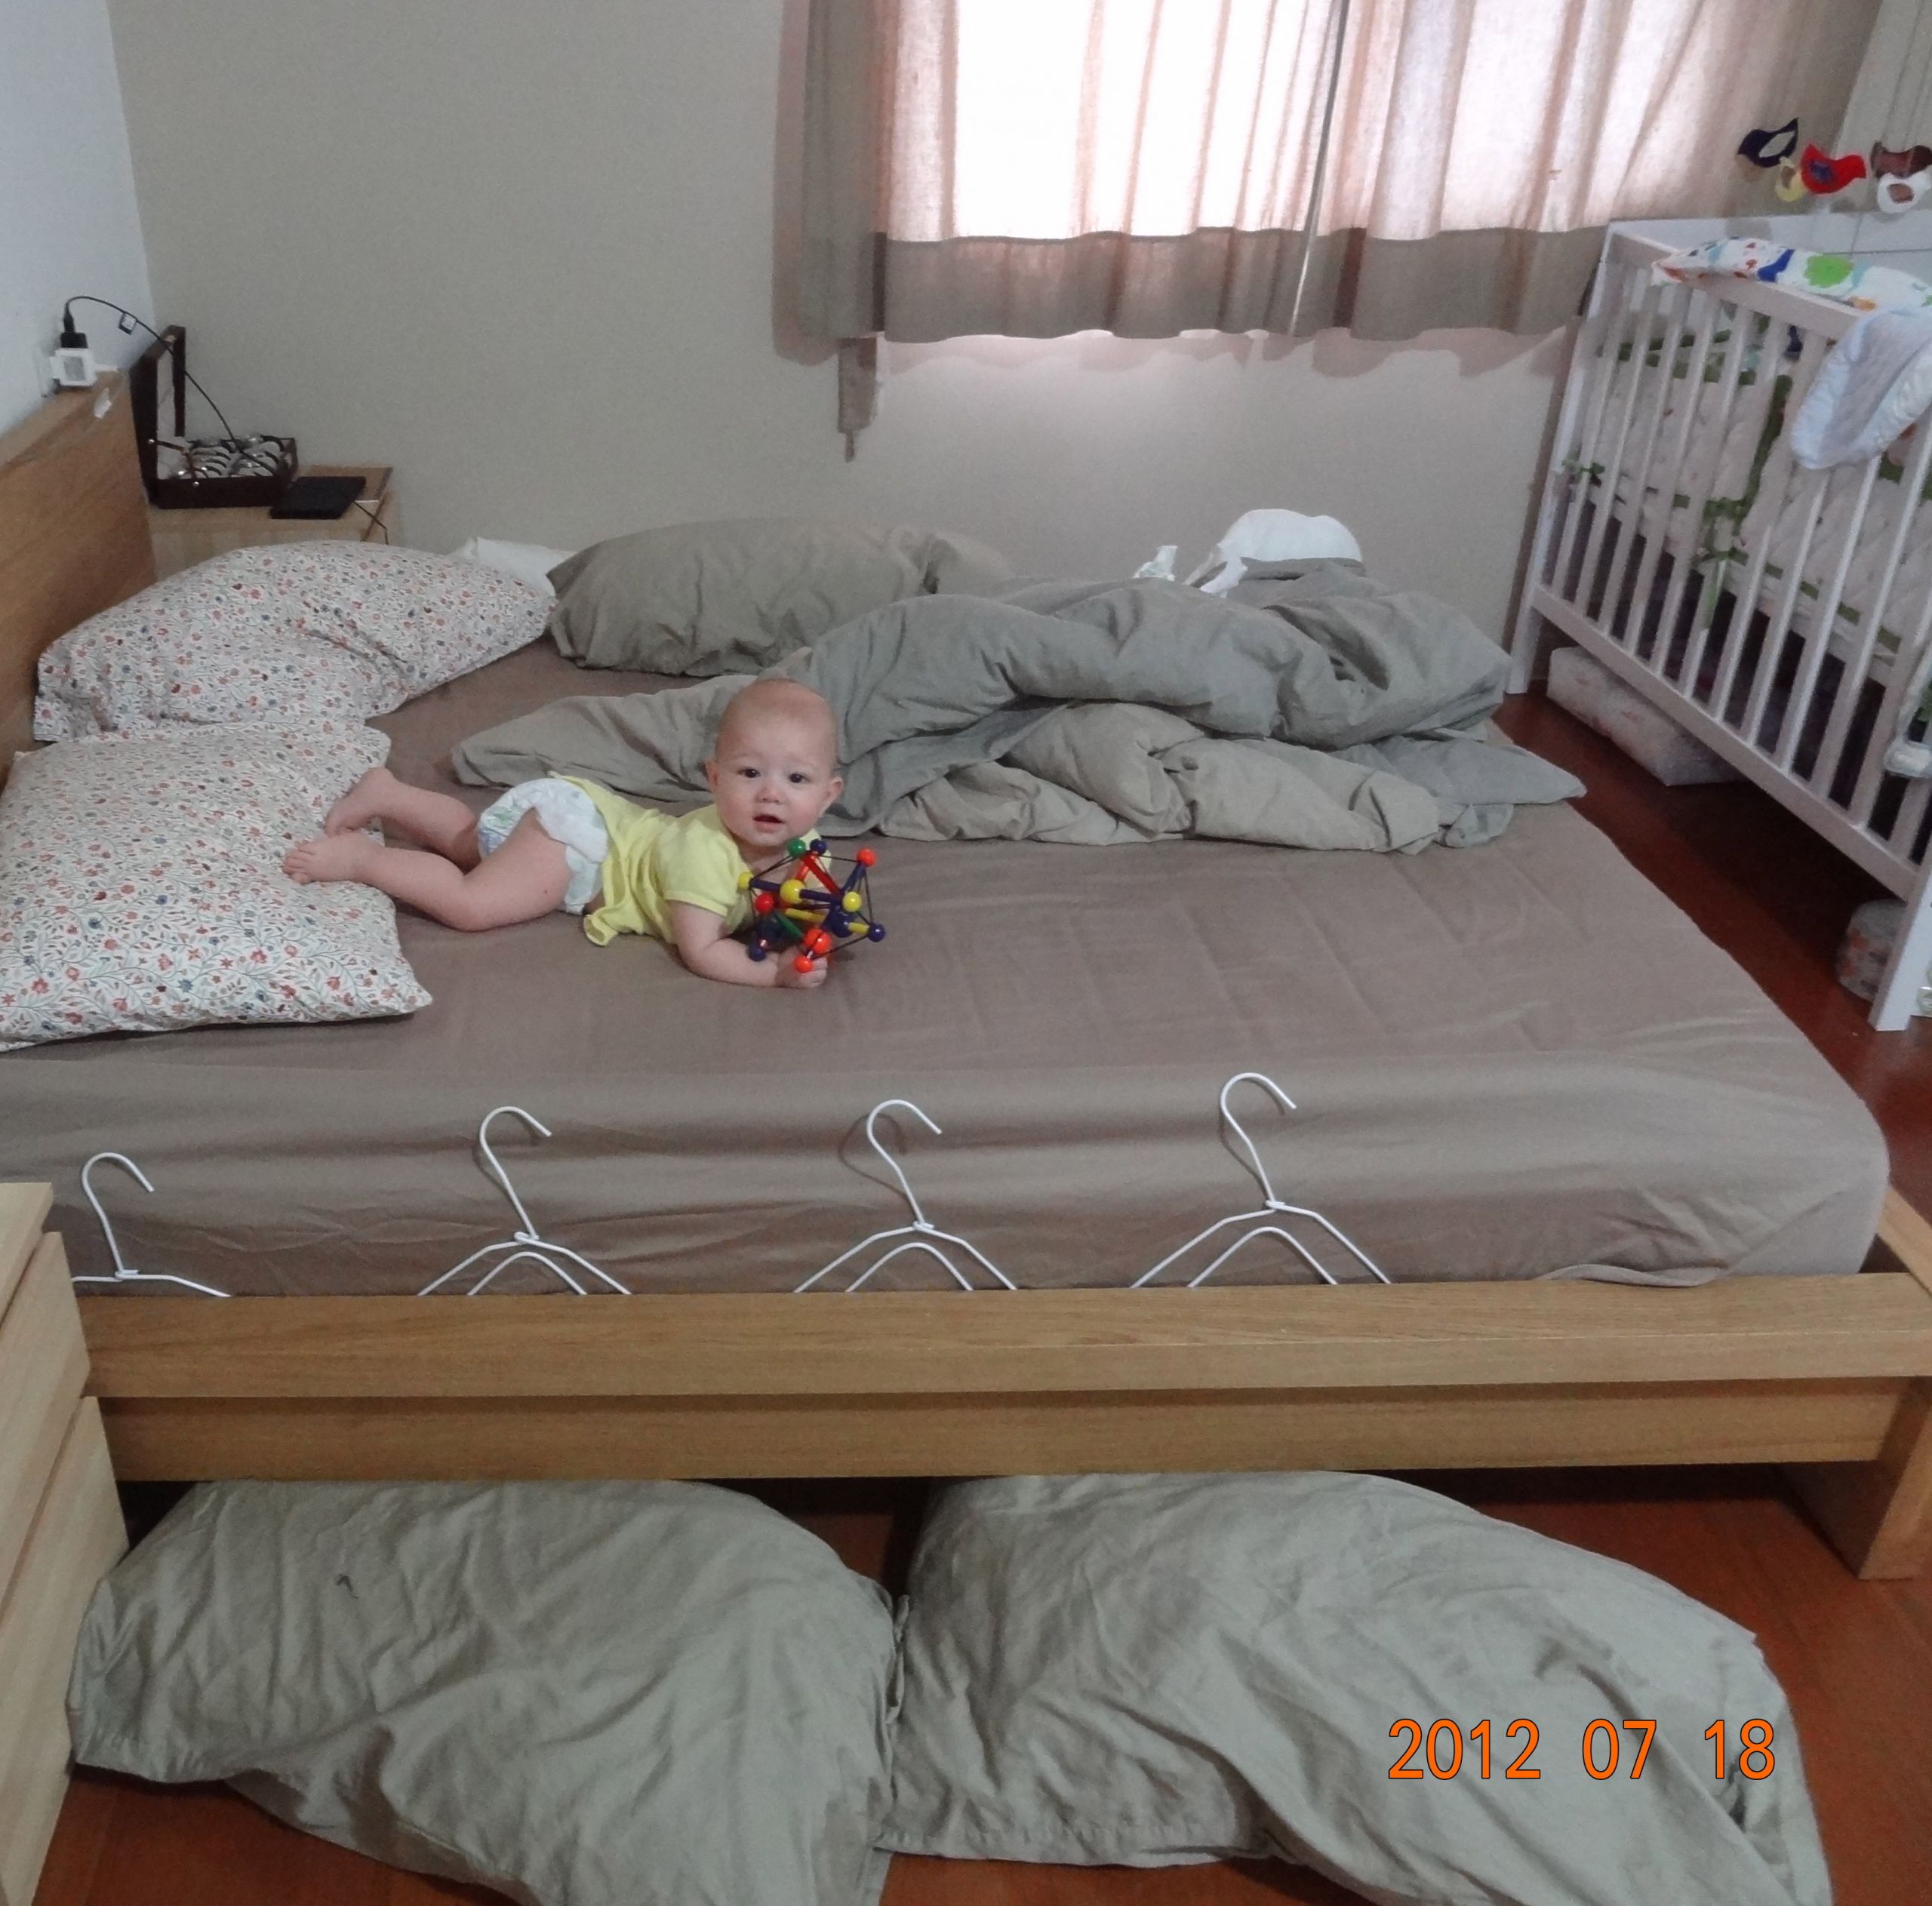 DIY Bed Rail For Toddler
 DIY baby Bedrail with swimming noodle